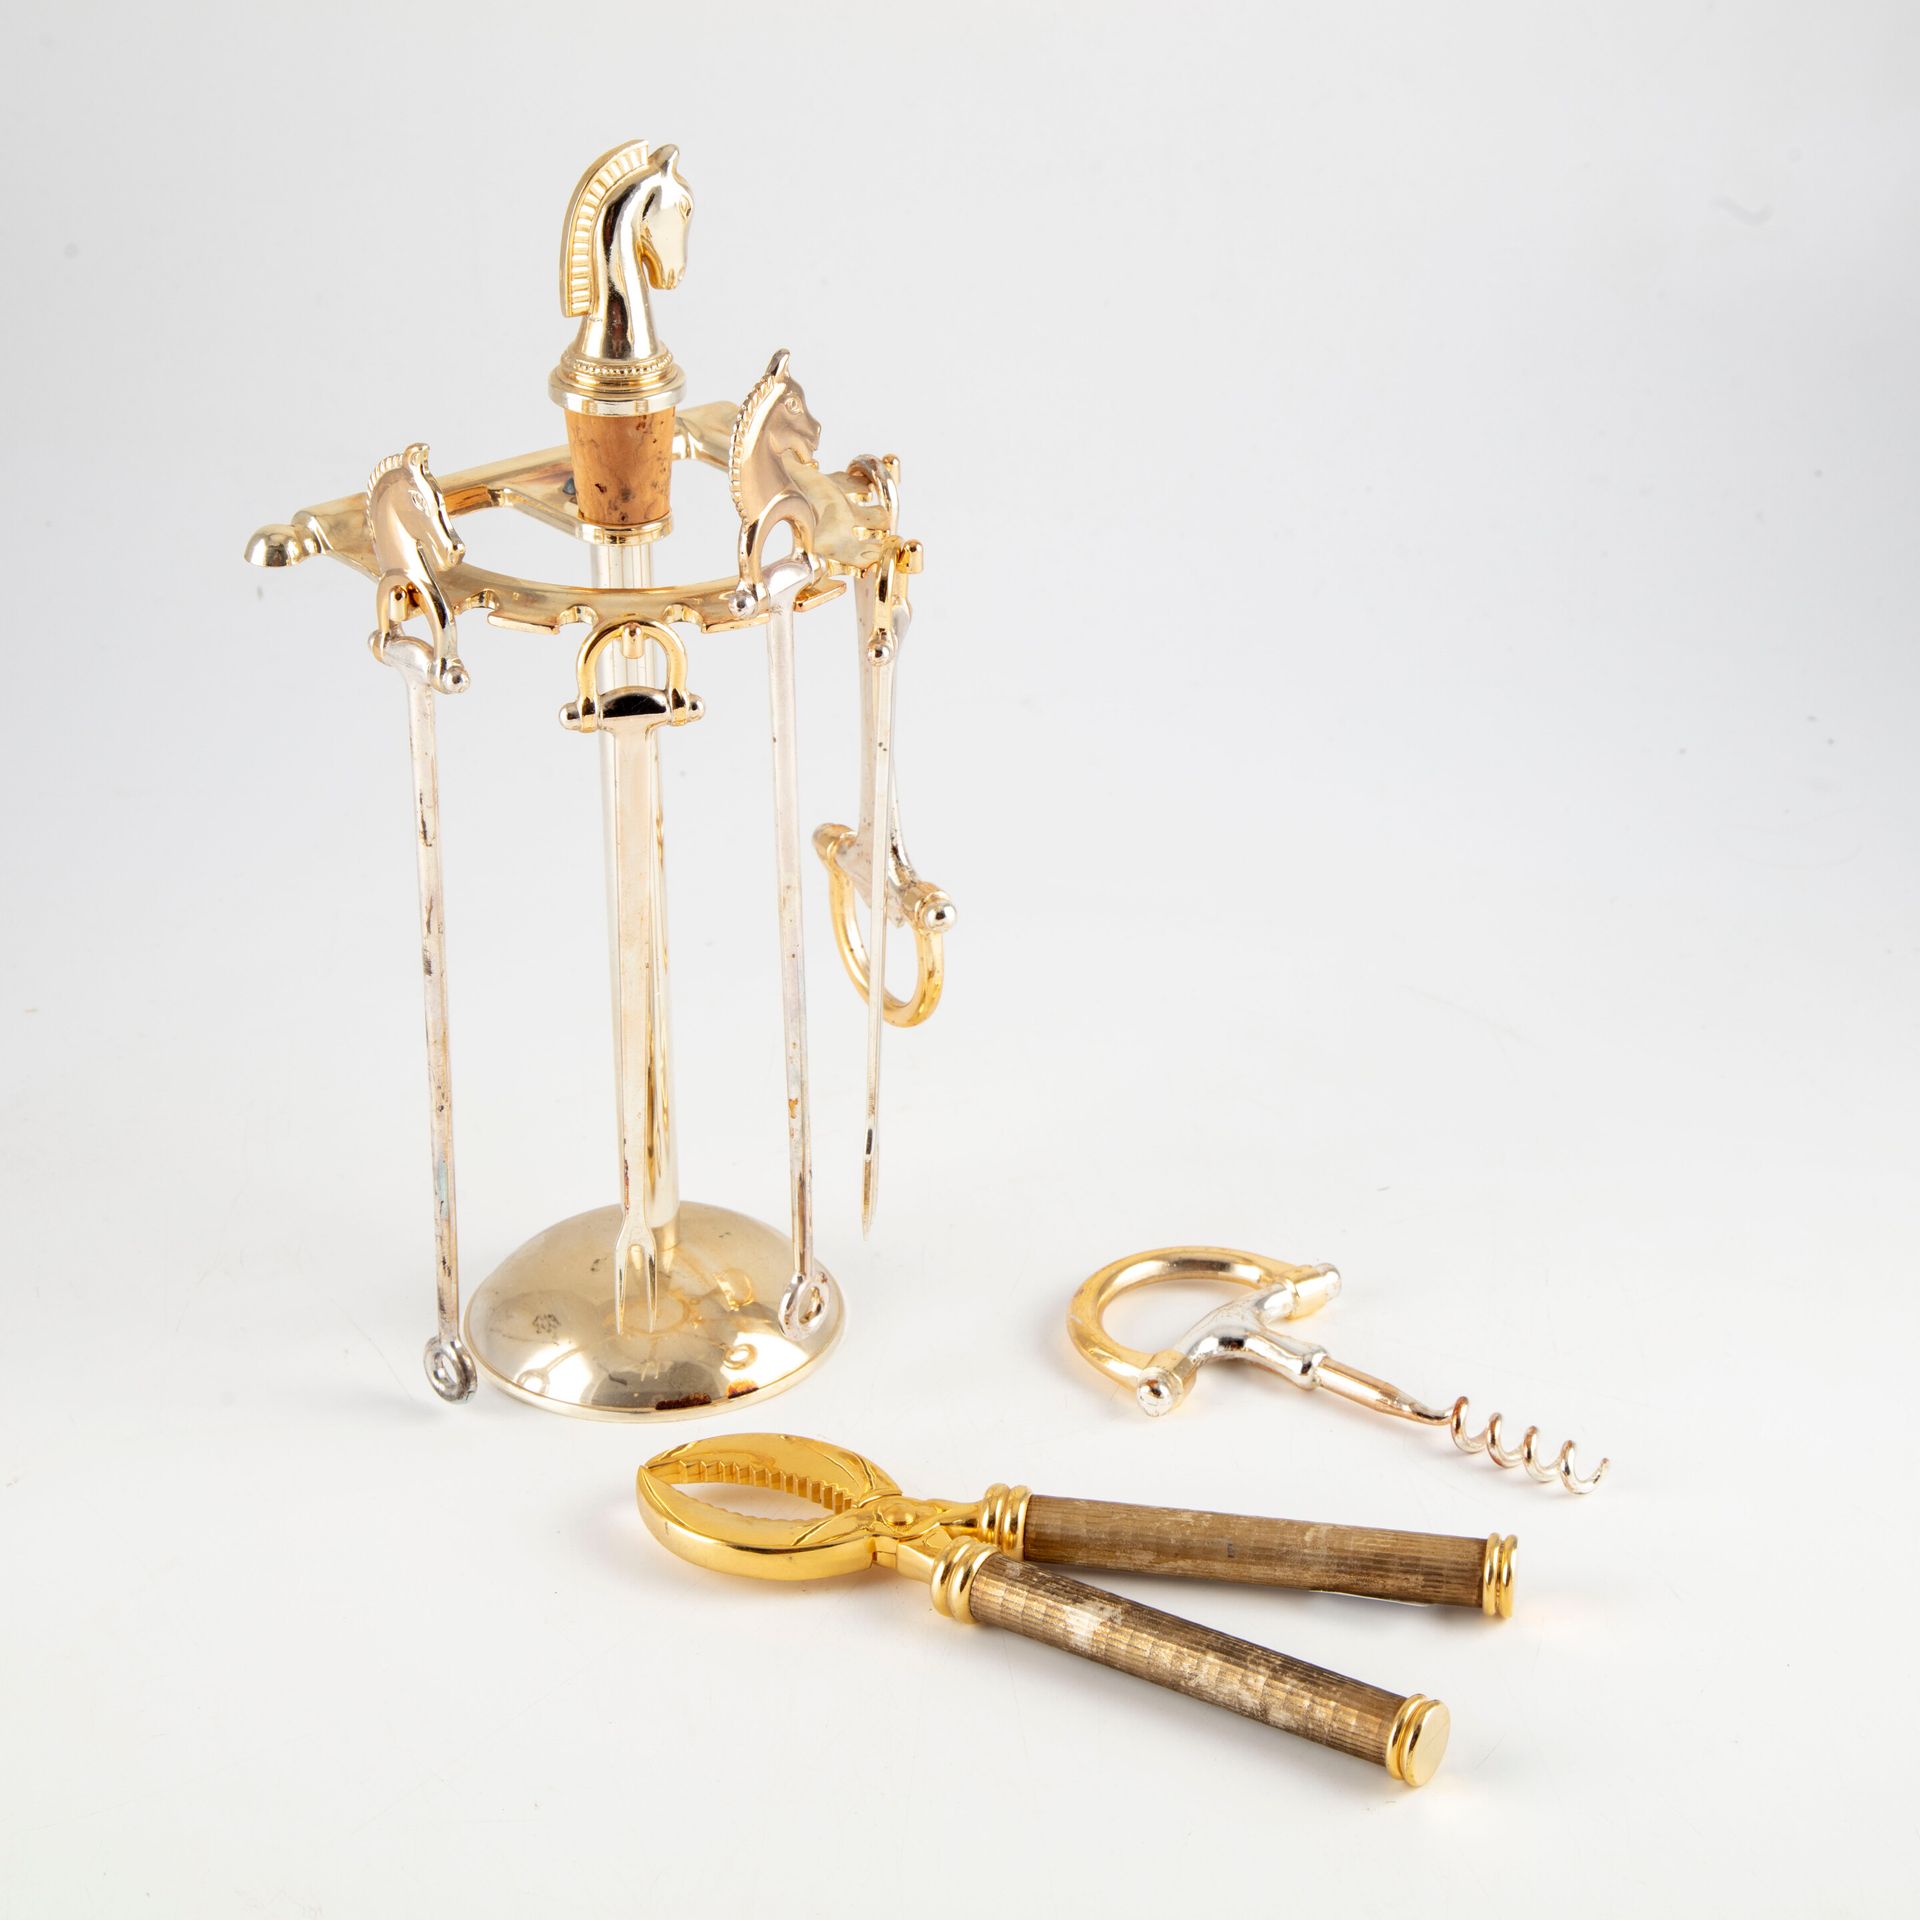 Null Display and utensils in gilded metal including thermometer, corkscrew, plie&hellip;